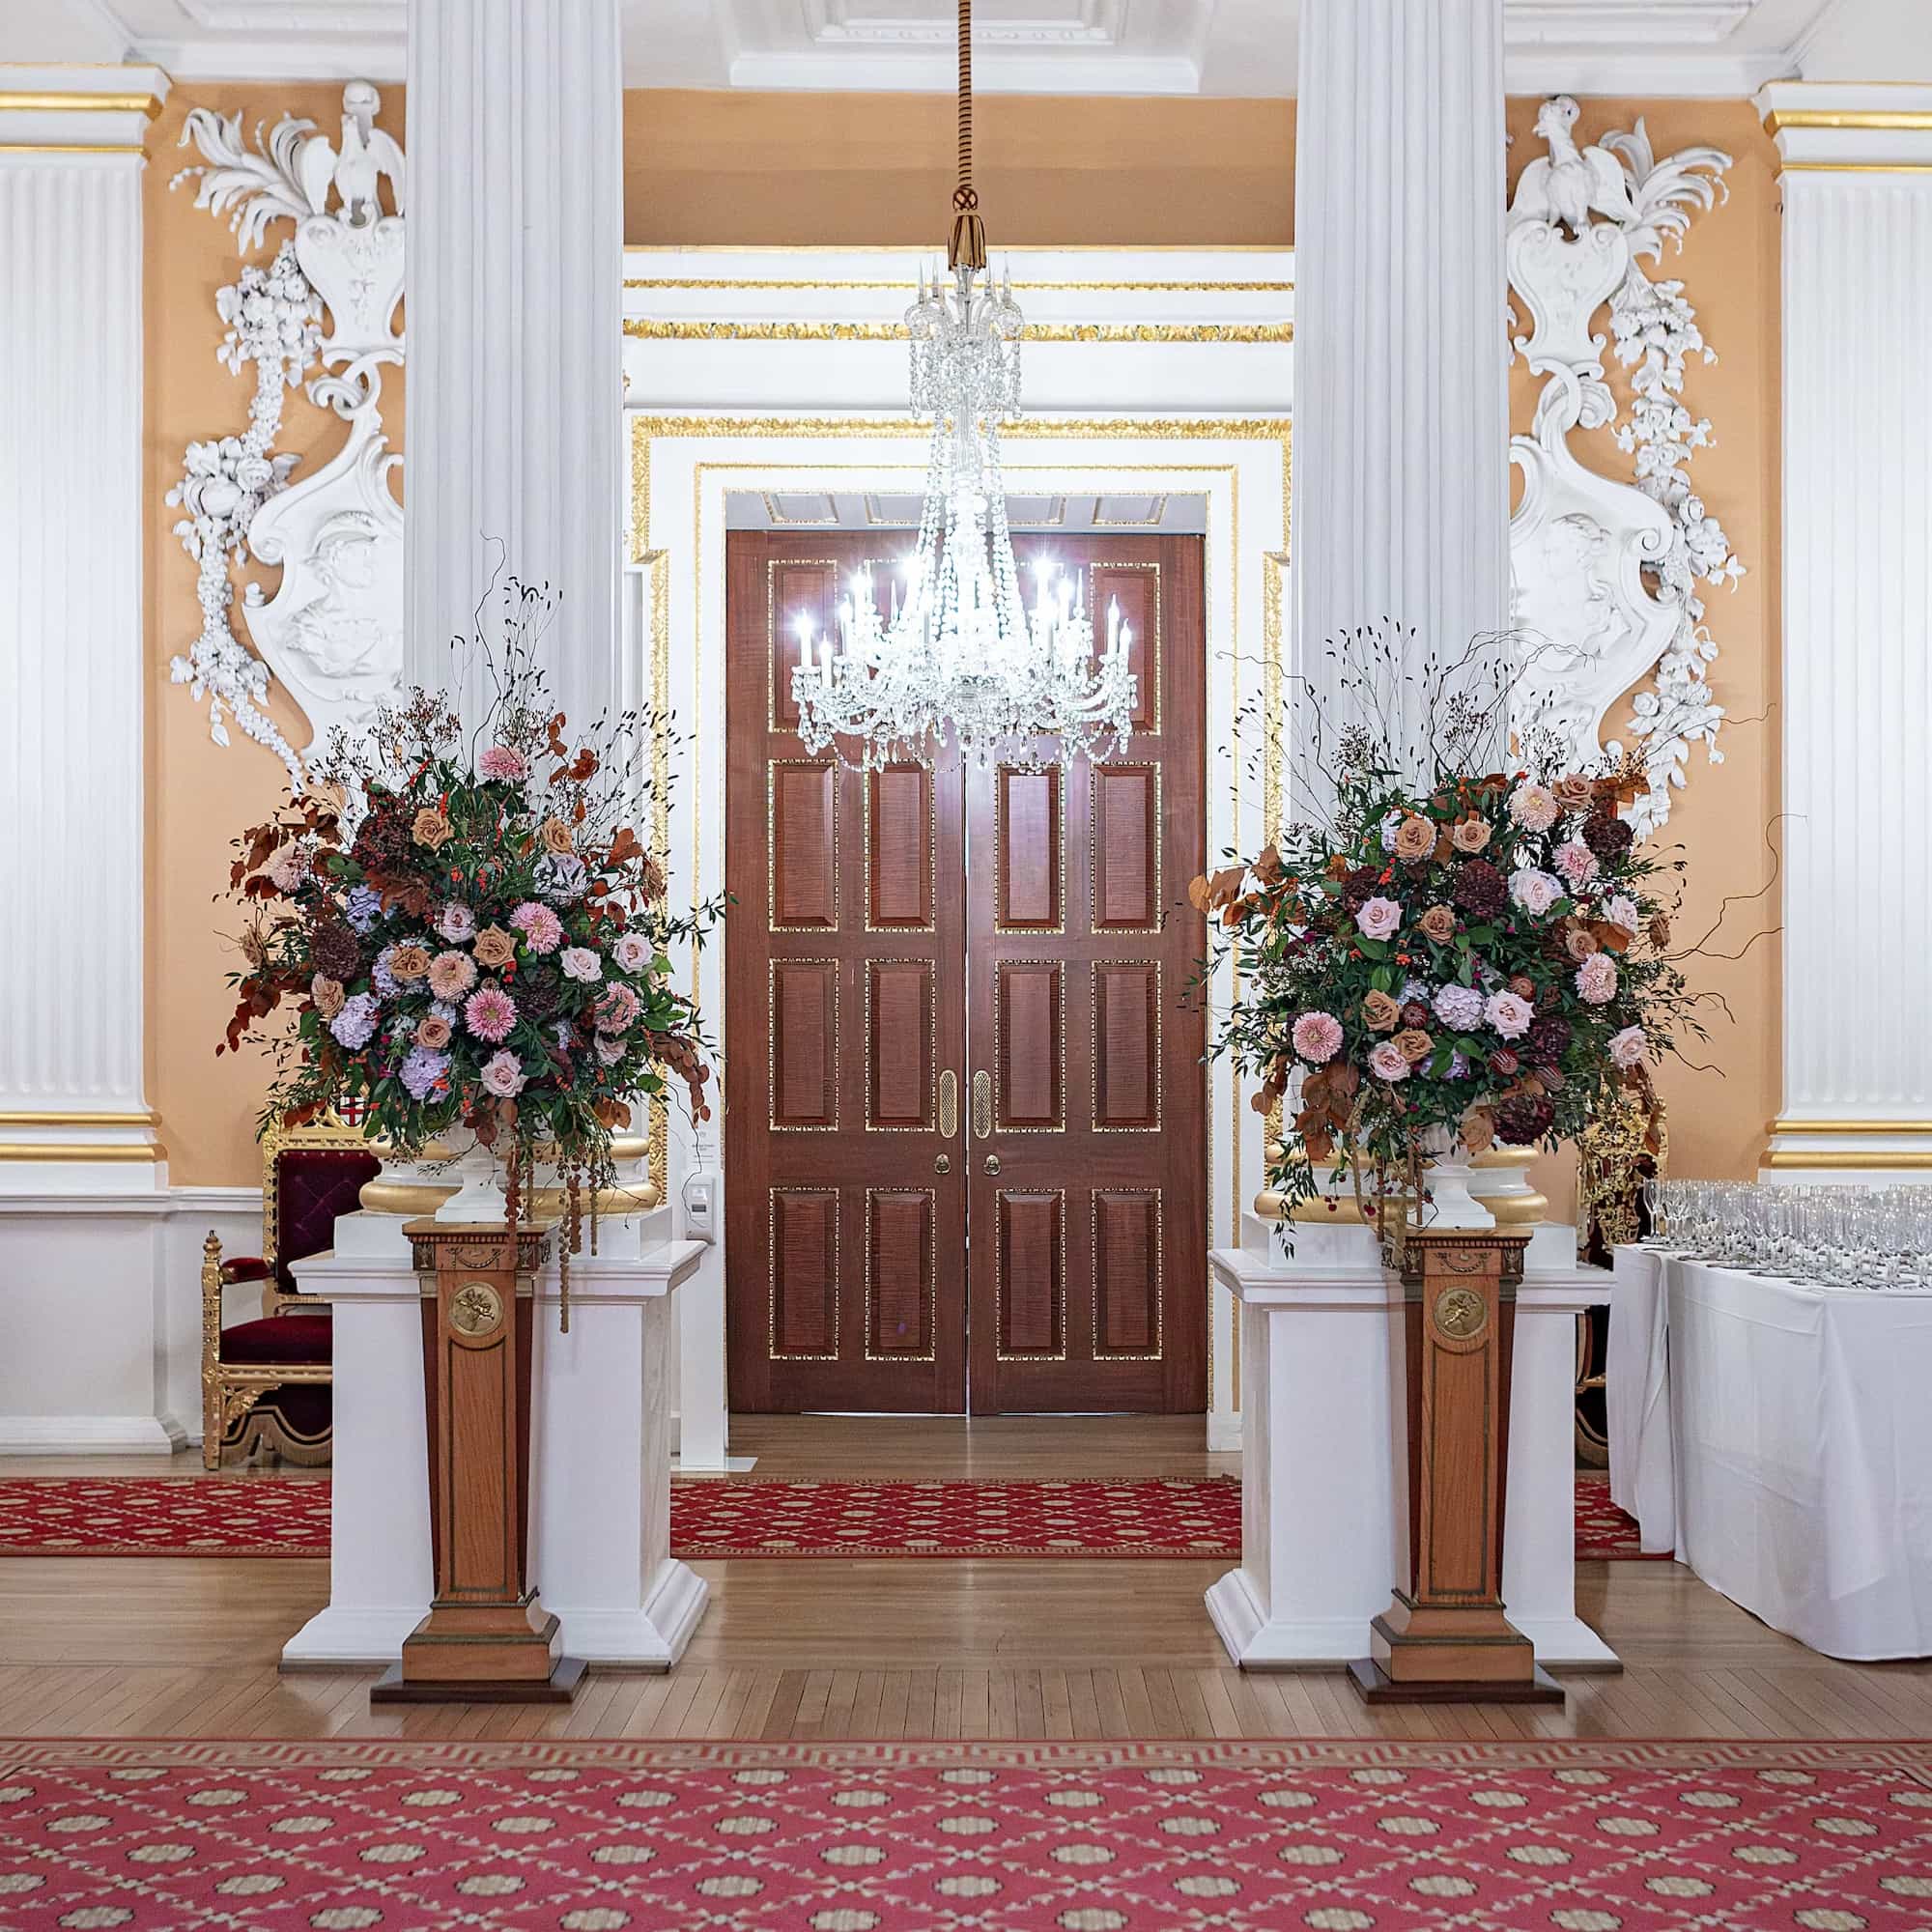 Unique custom floral displays on pillars to greet guests at the event entrance